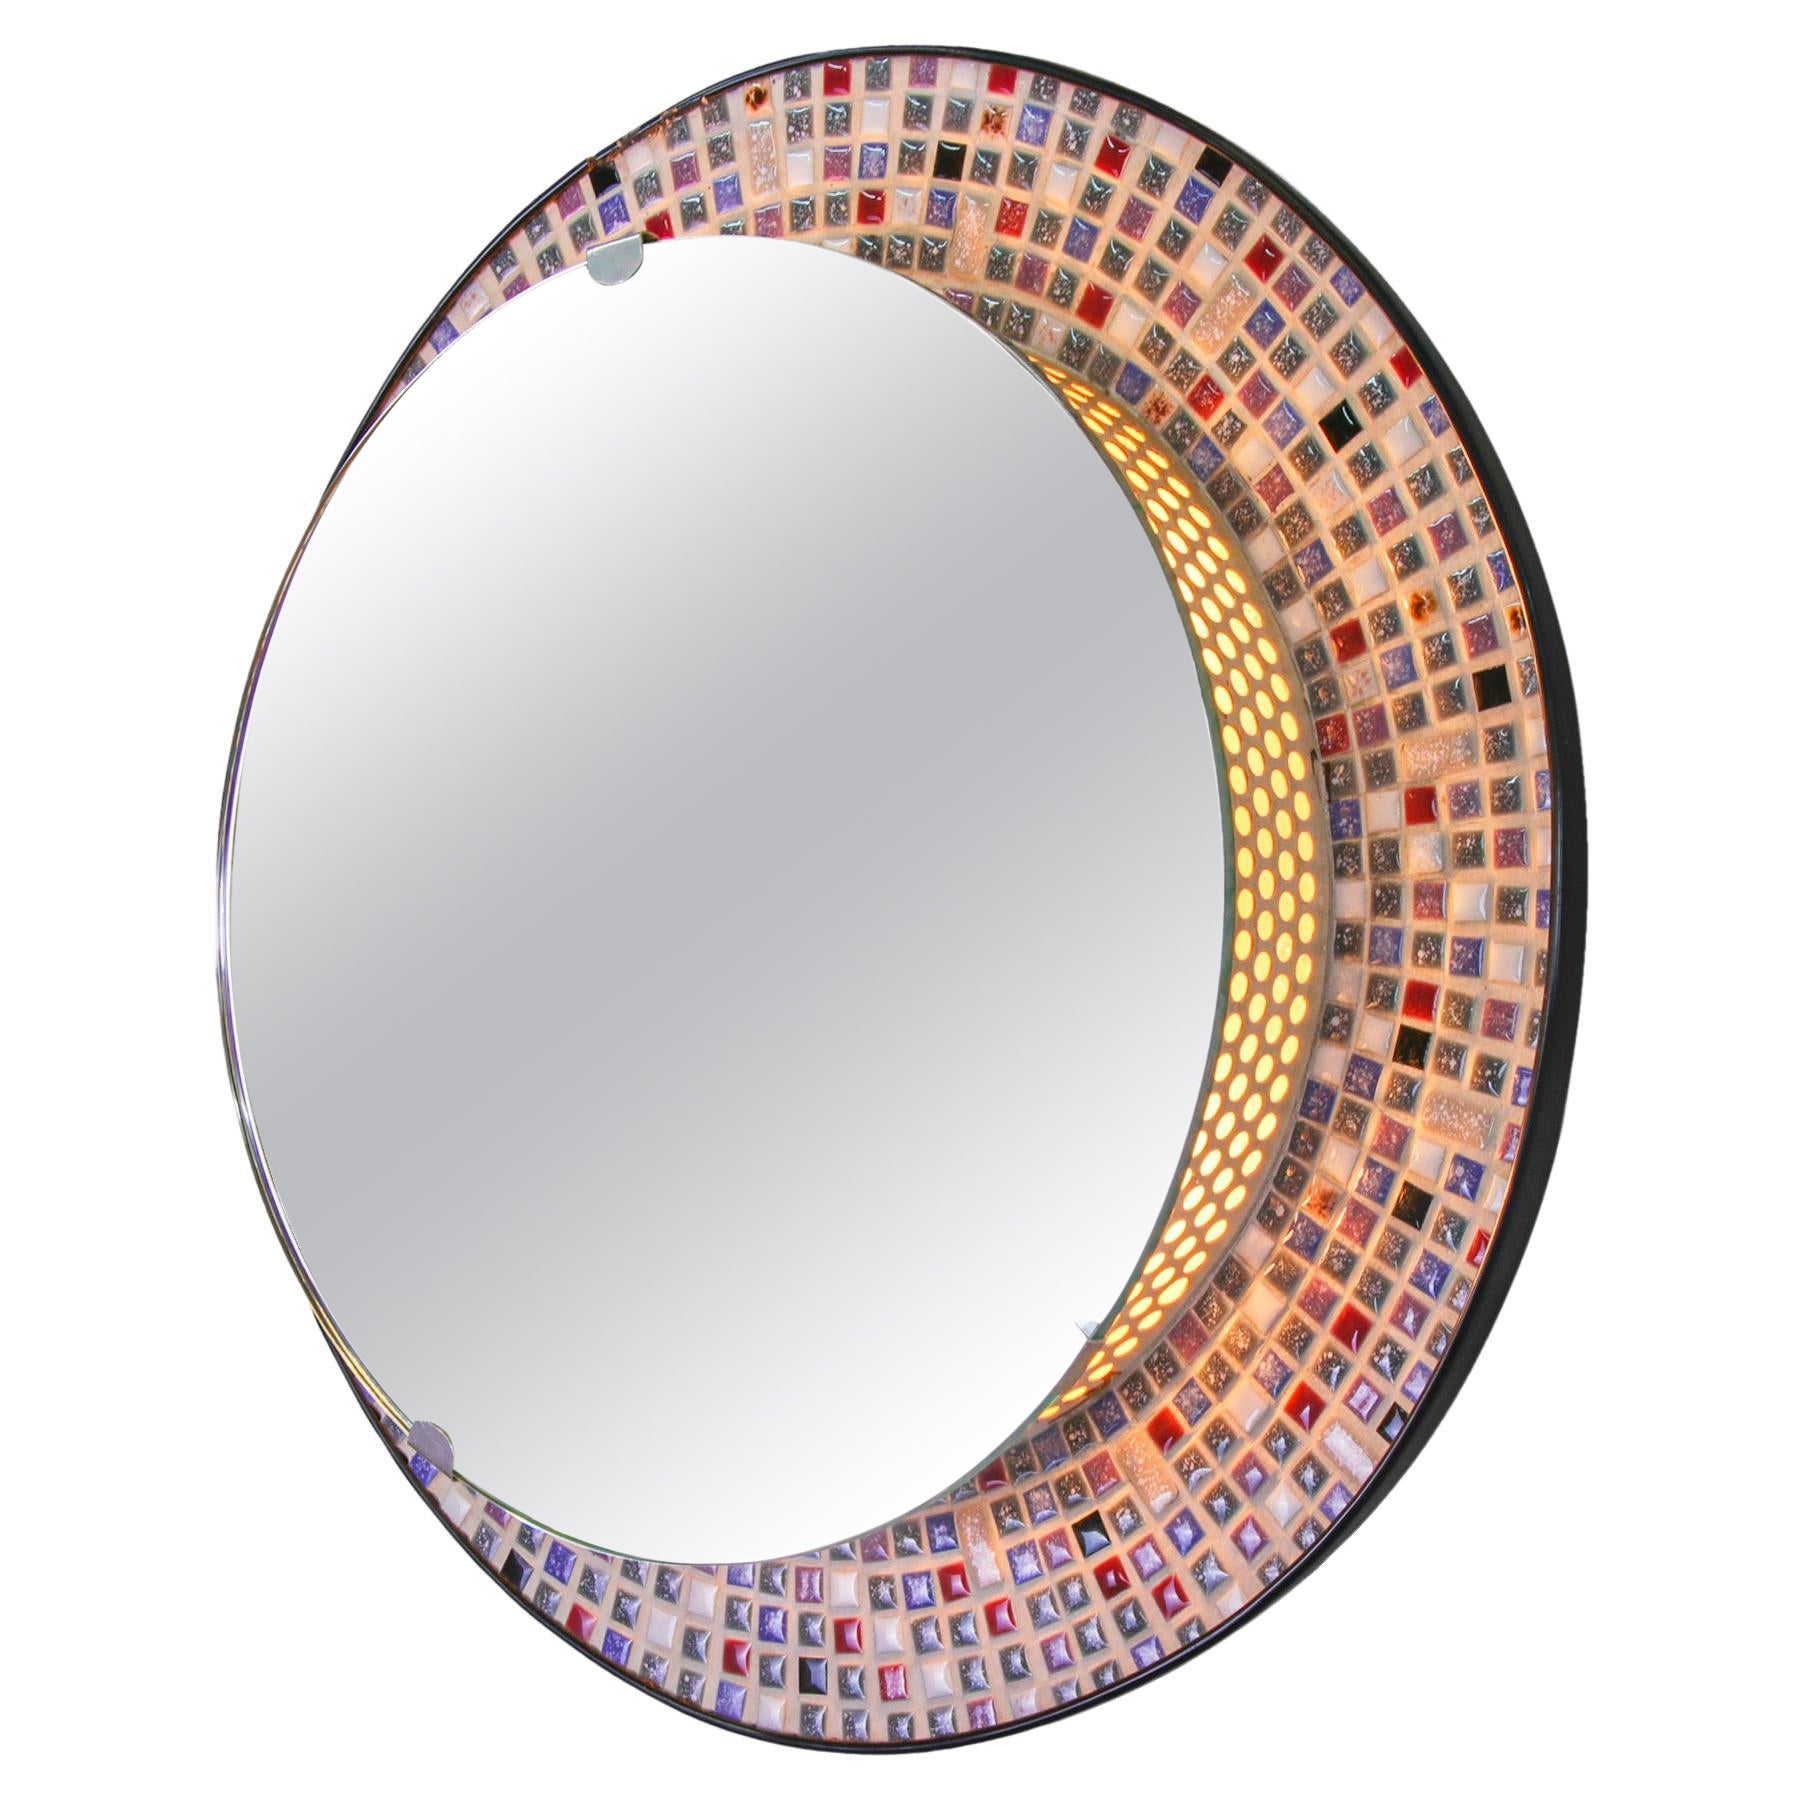 Circular Mosaic Backlit Mirror Glass and Perforated Metal, Germany 1950s